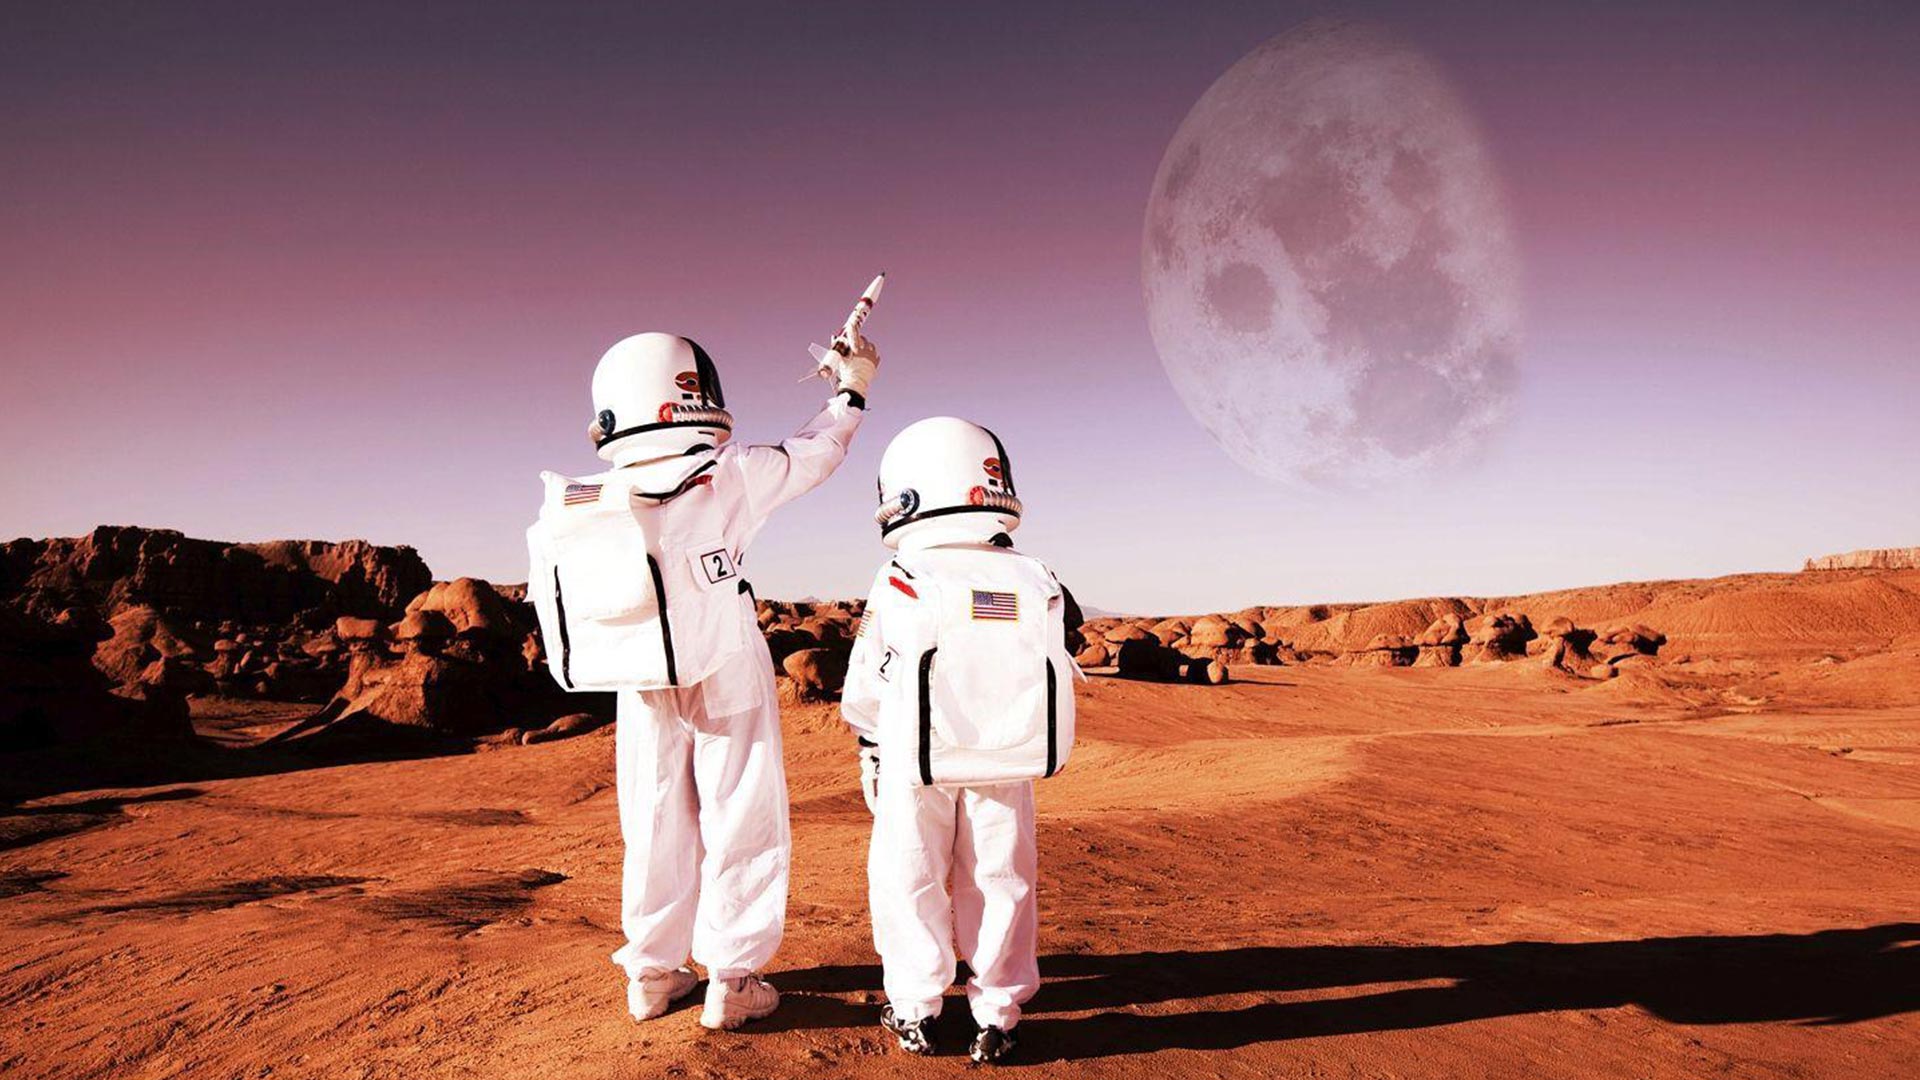 two astronaughts walking on a dry, red planet with the moon in the background